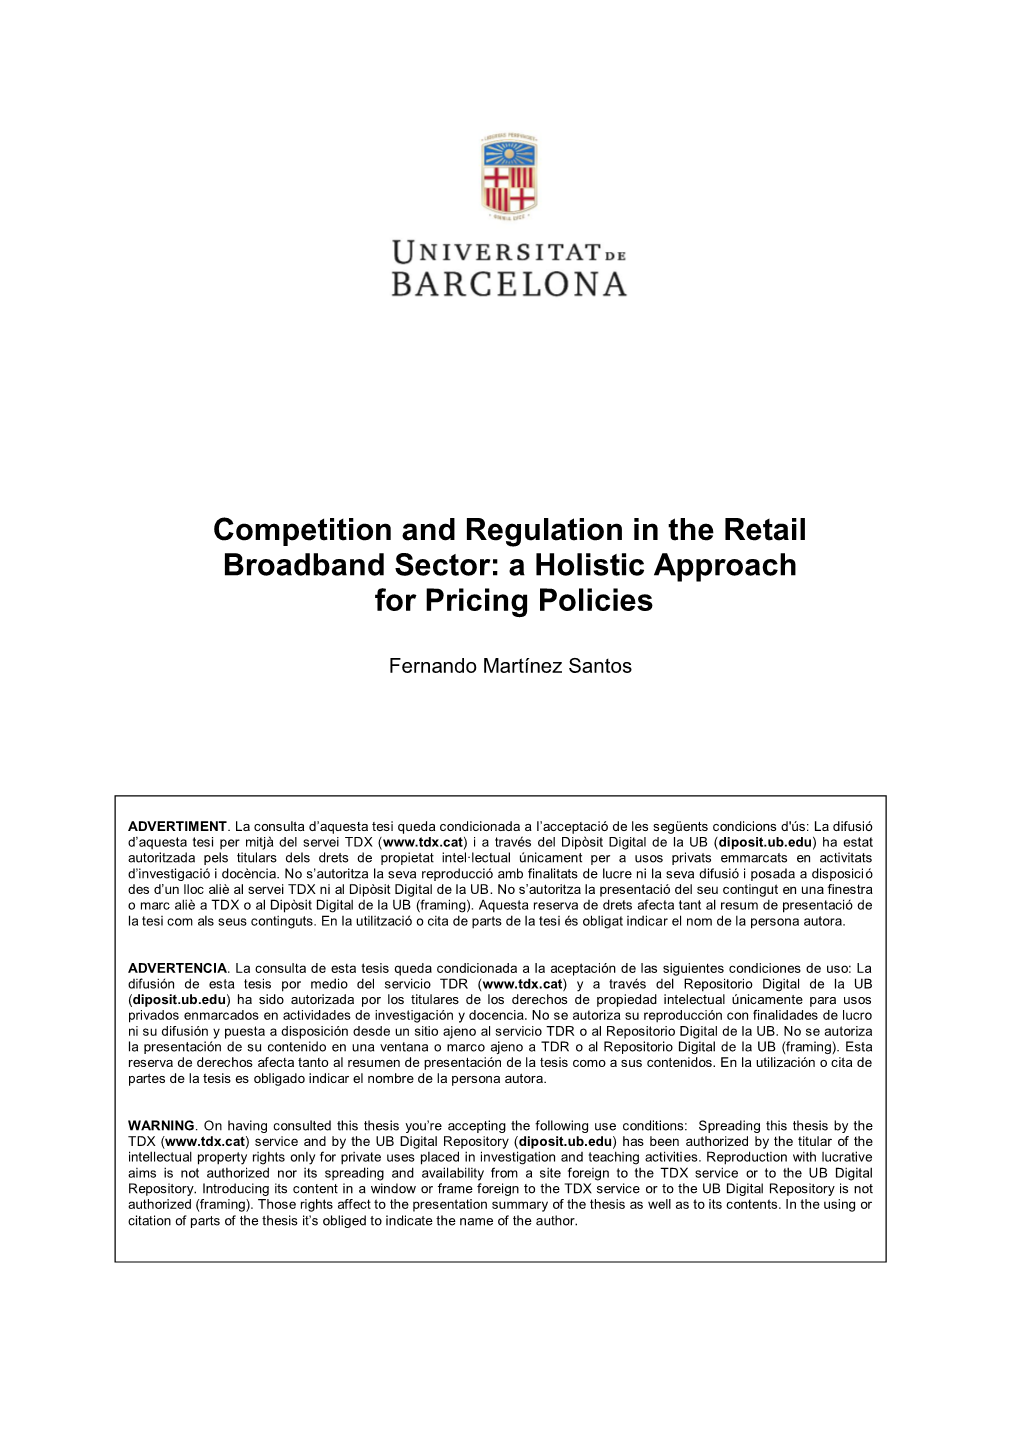 Competition and Regulation in the Retail Broadband Sector: a Holistic Approach for Pricing Policies